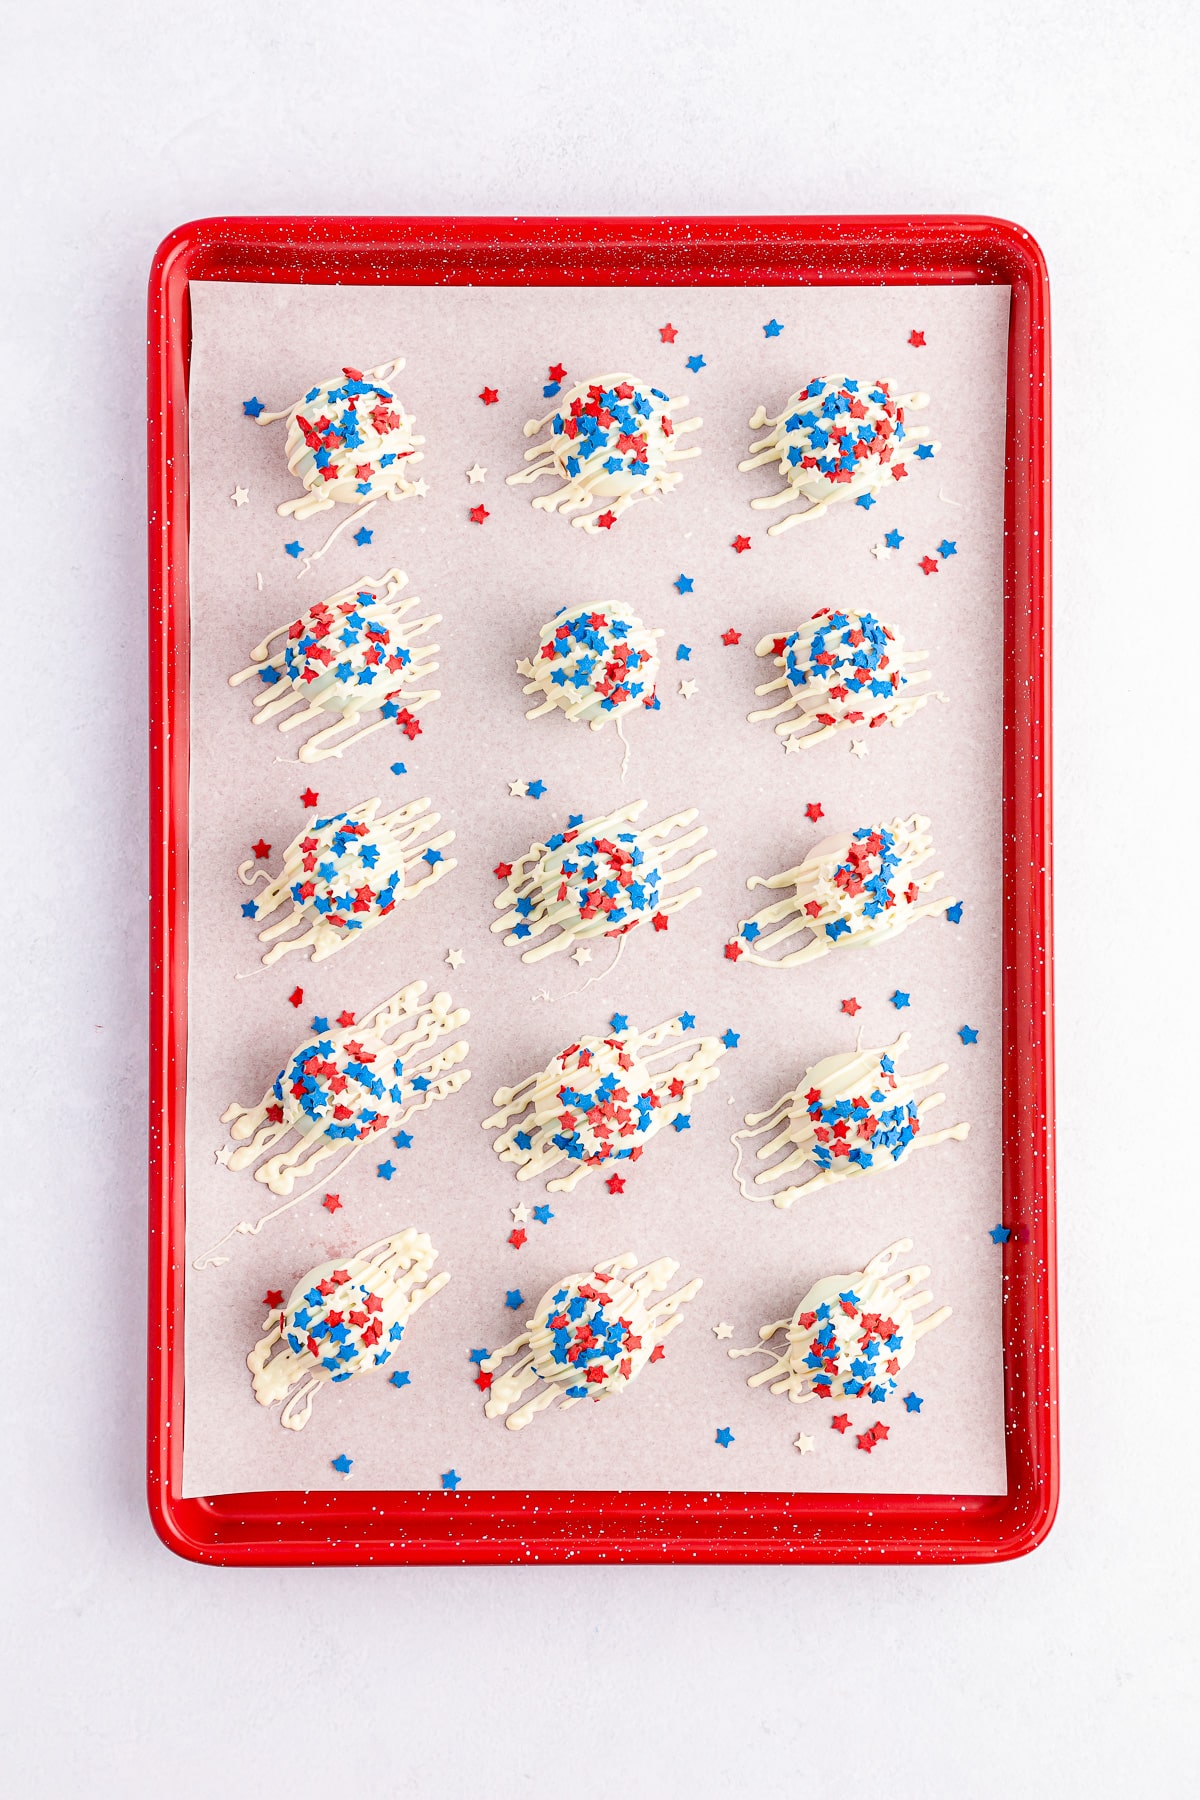 Cake balls coated in white chocolate and red and blue sprinkles from overhead on a baking sheet.